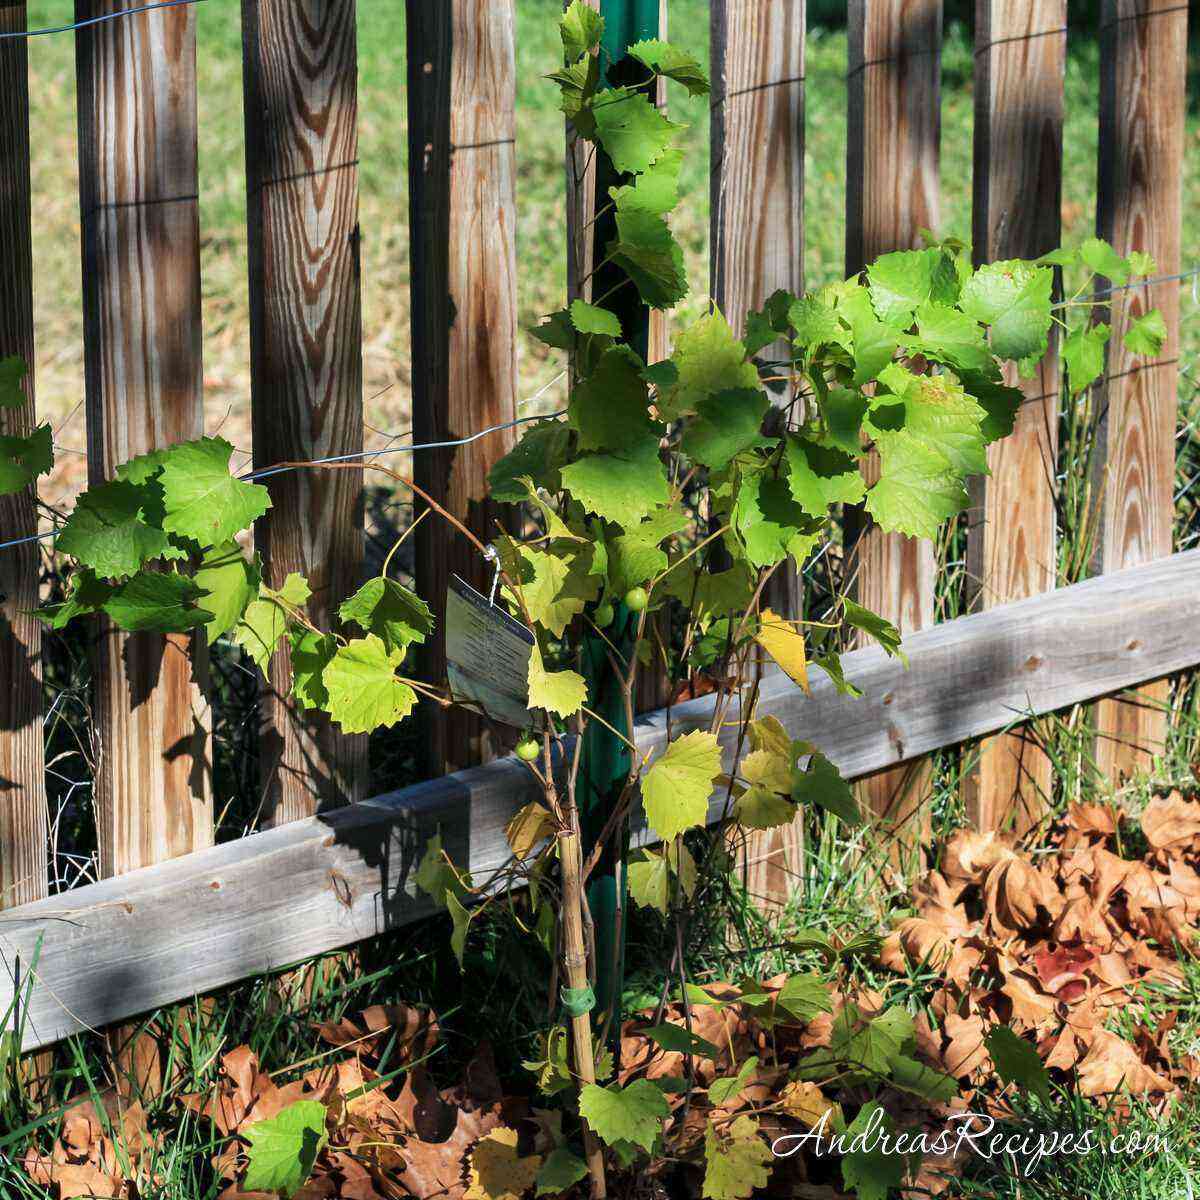 Wild grapes on the fence